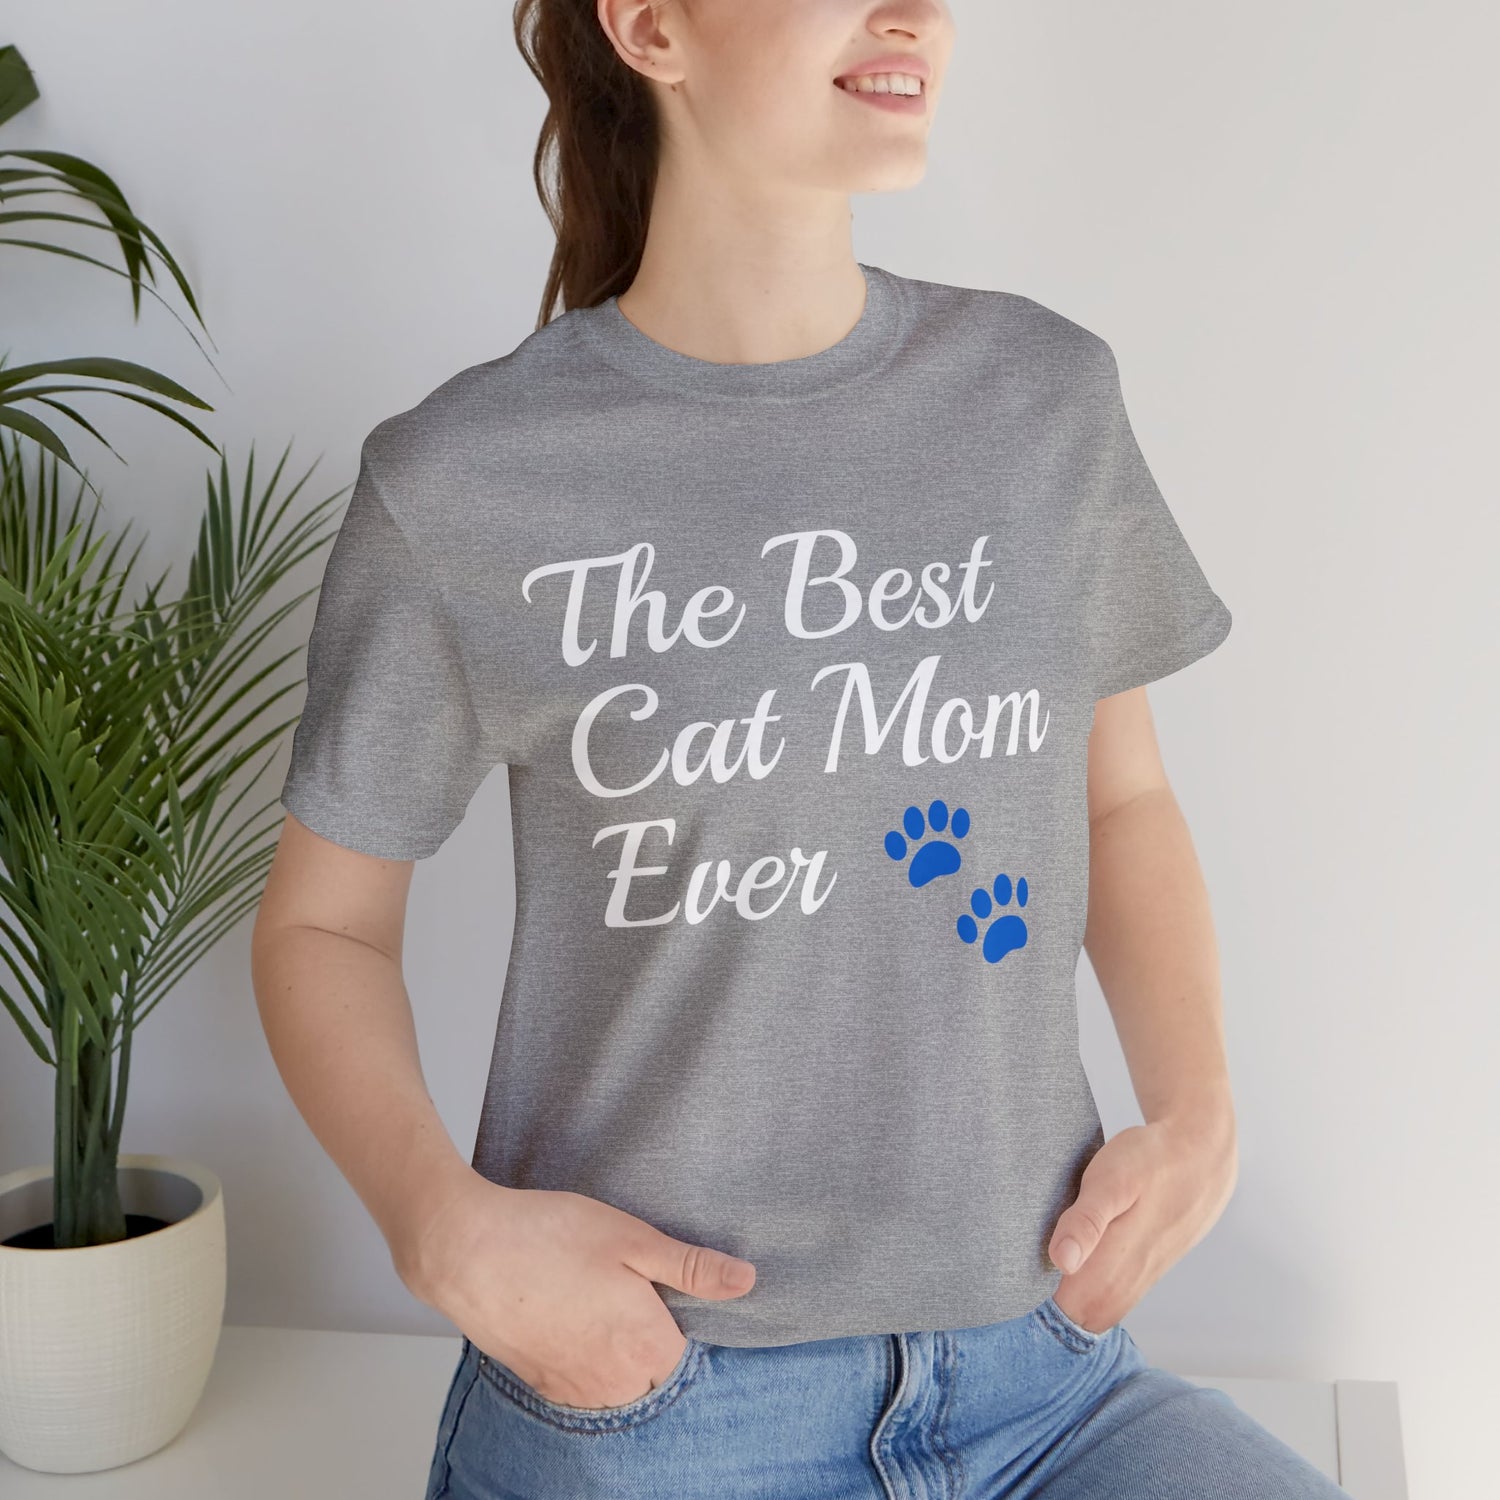 T-Shirt Tshirt Gift for Friends and Family Short Sleeve T Shirt For Cat Lovers Gift Petrova Designs